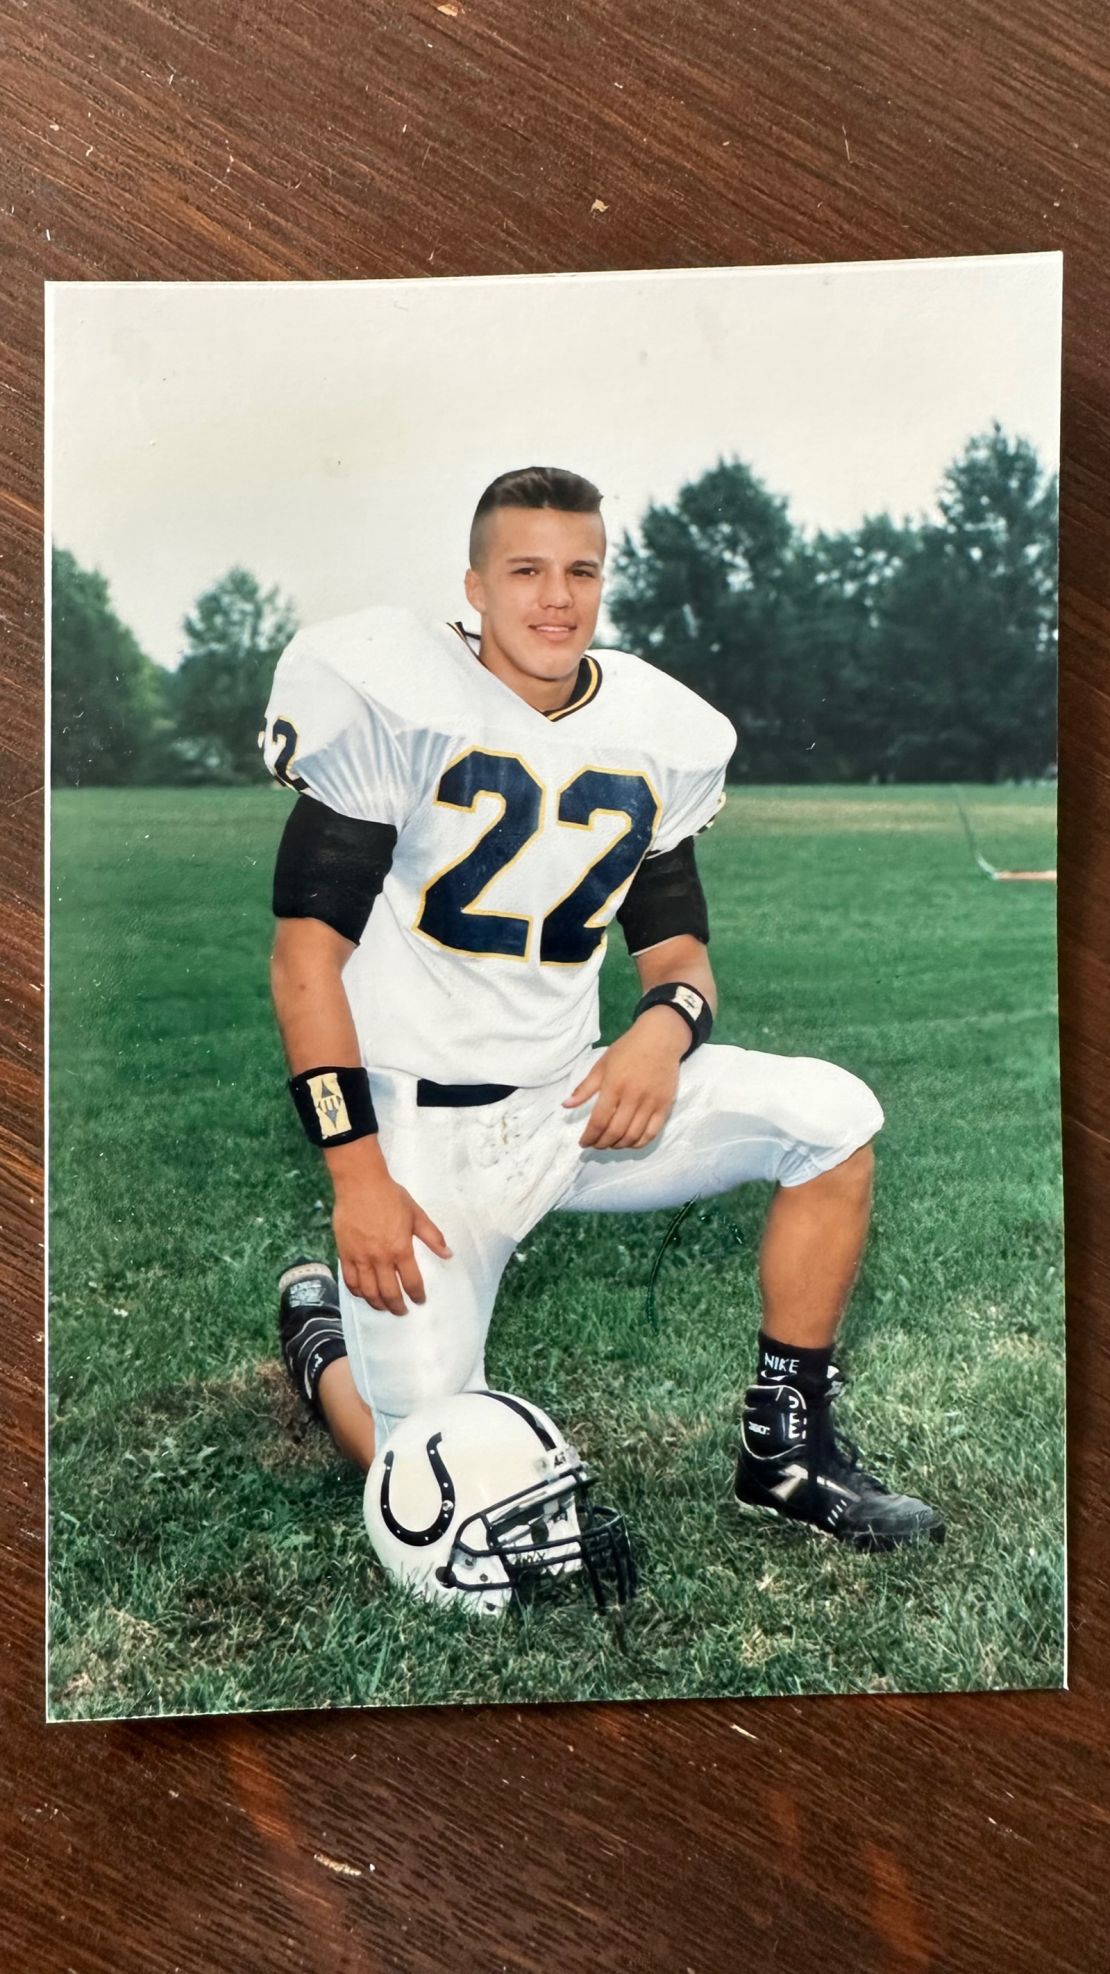 Coy Wire at age 14 in his freshman year at Cedar Cliff High School in Pennsylvania.